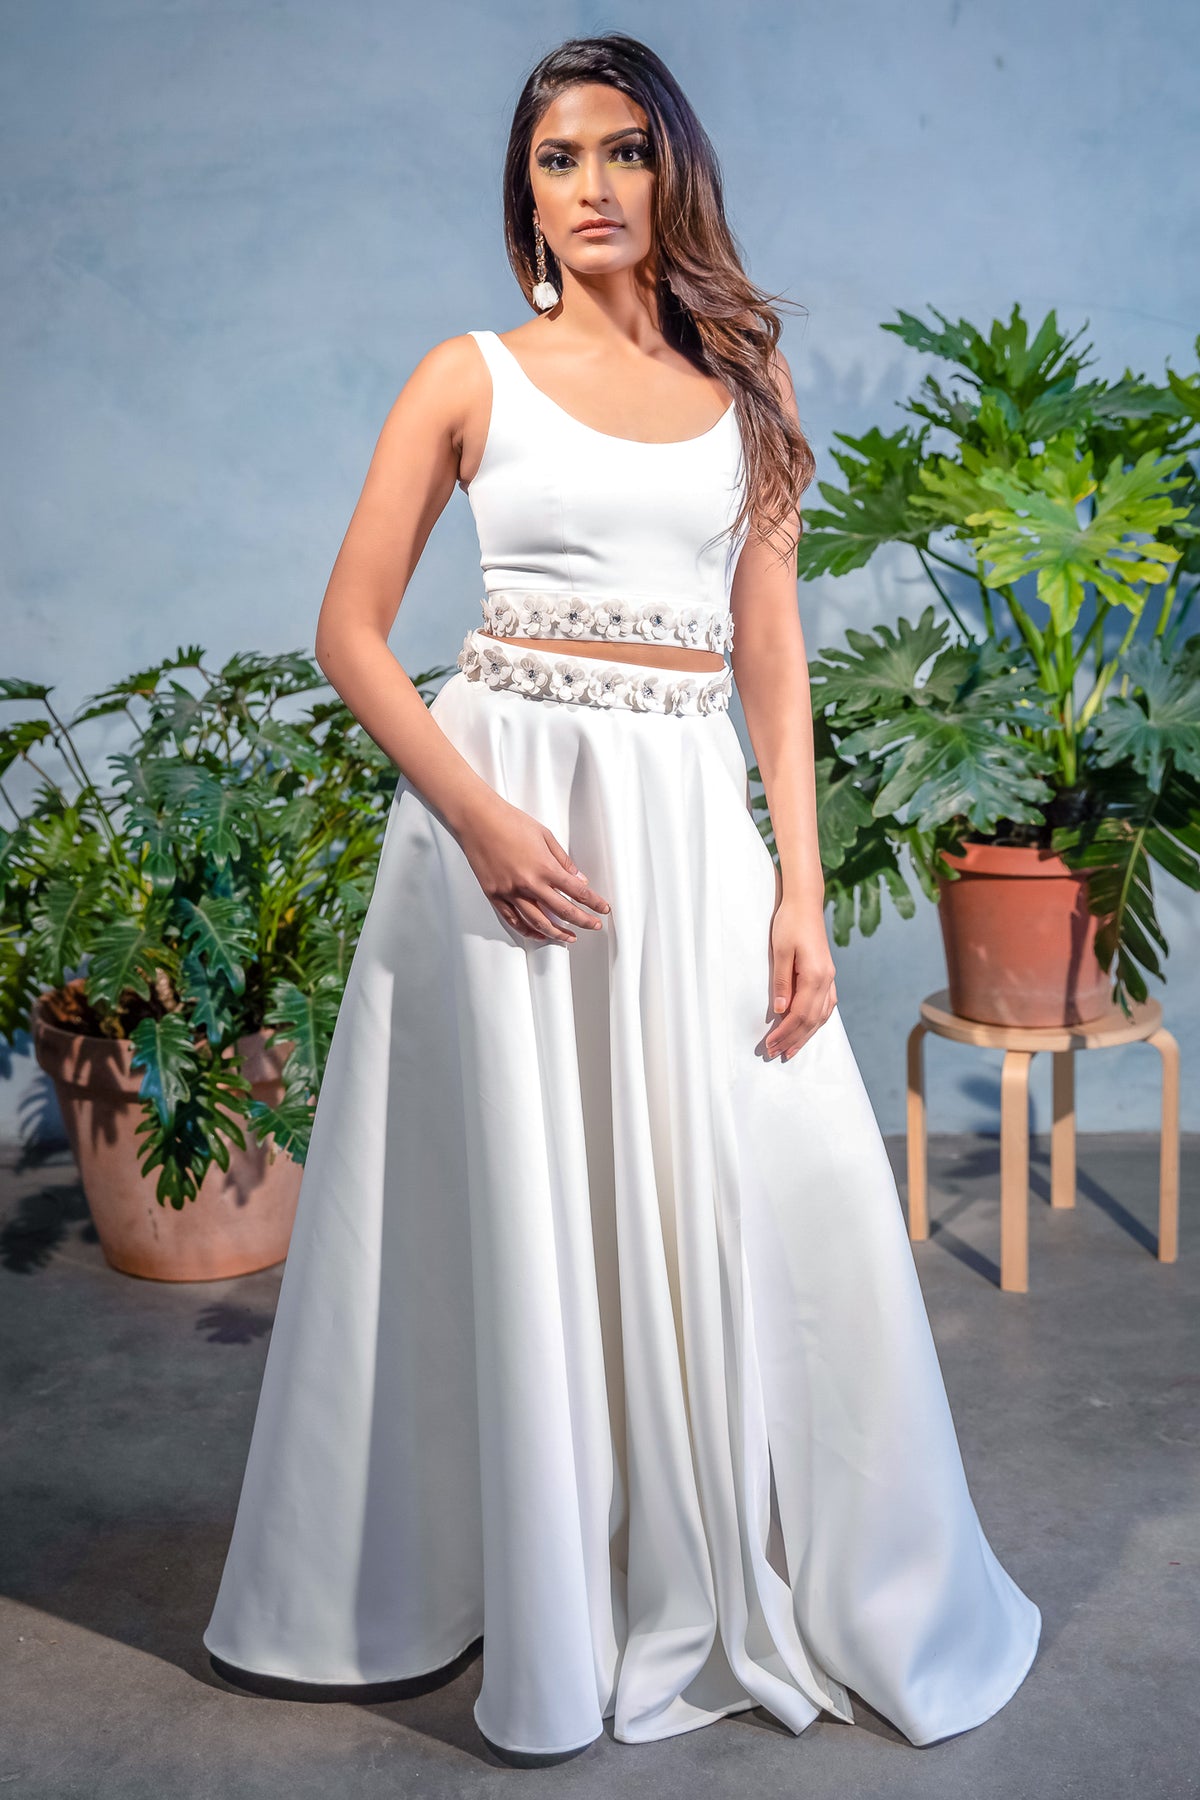 EZYA White Matte Satin Skirt with Floral Embroidery on the Waist - Front View - Harleen Kaur